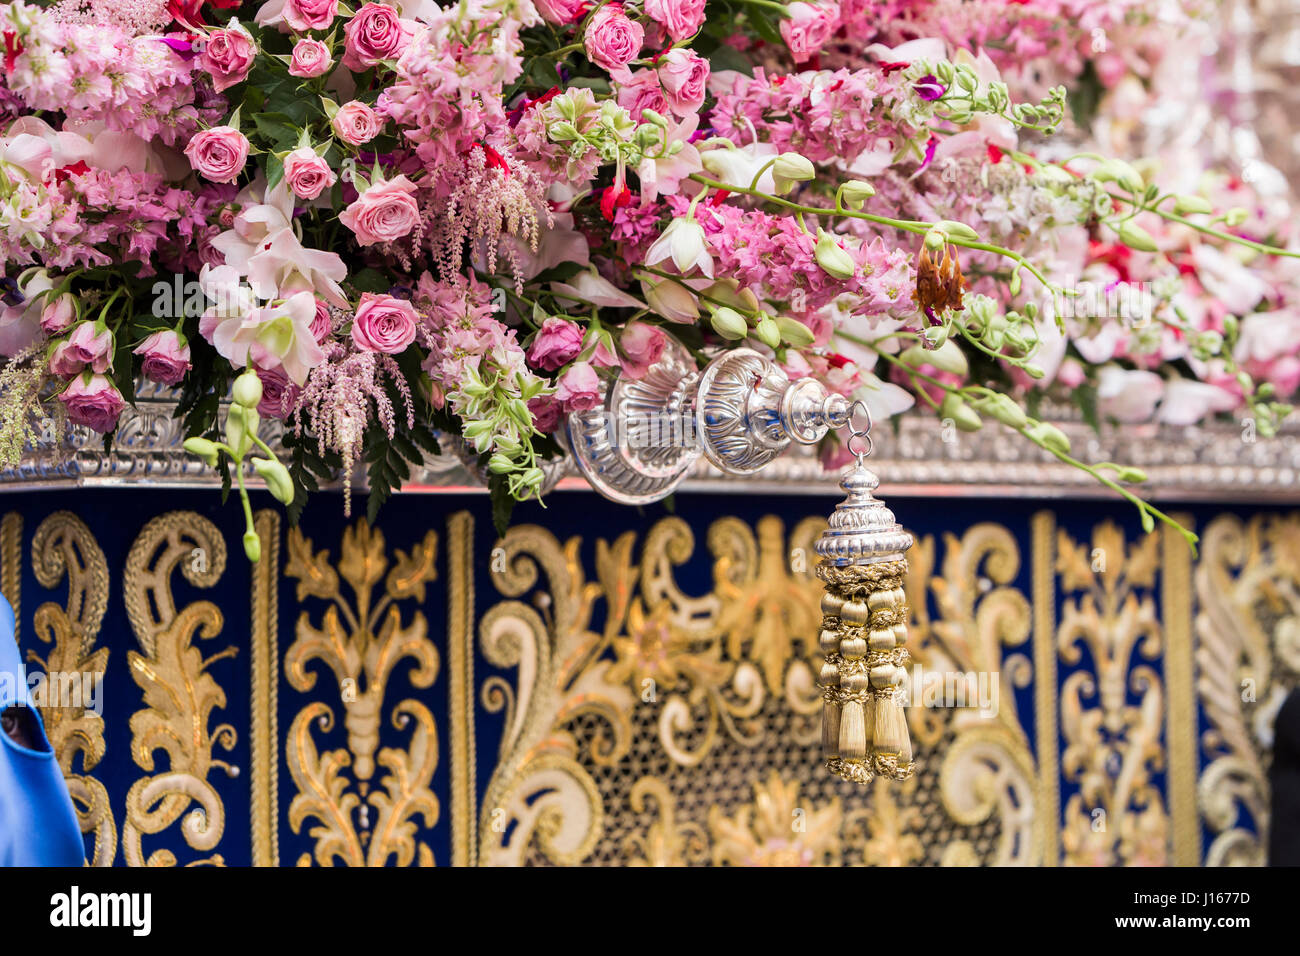 Detail of floral ornamentation on a throne of Holy week, Linares, Andalusia, Spain Stock Photo